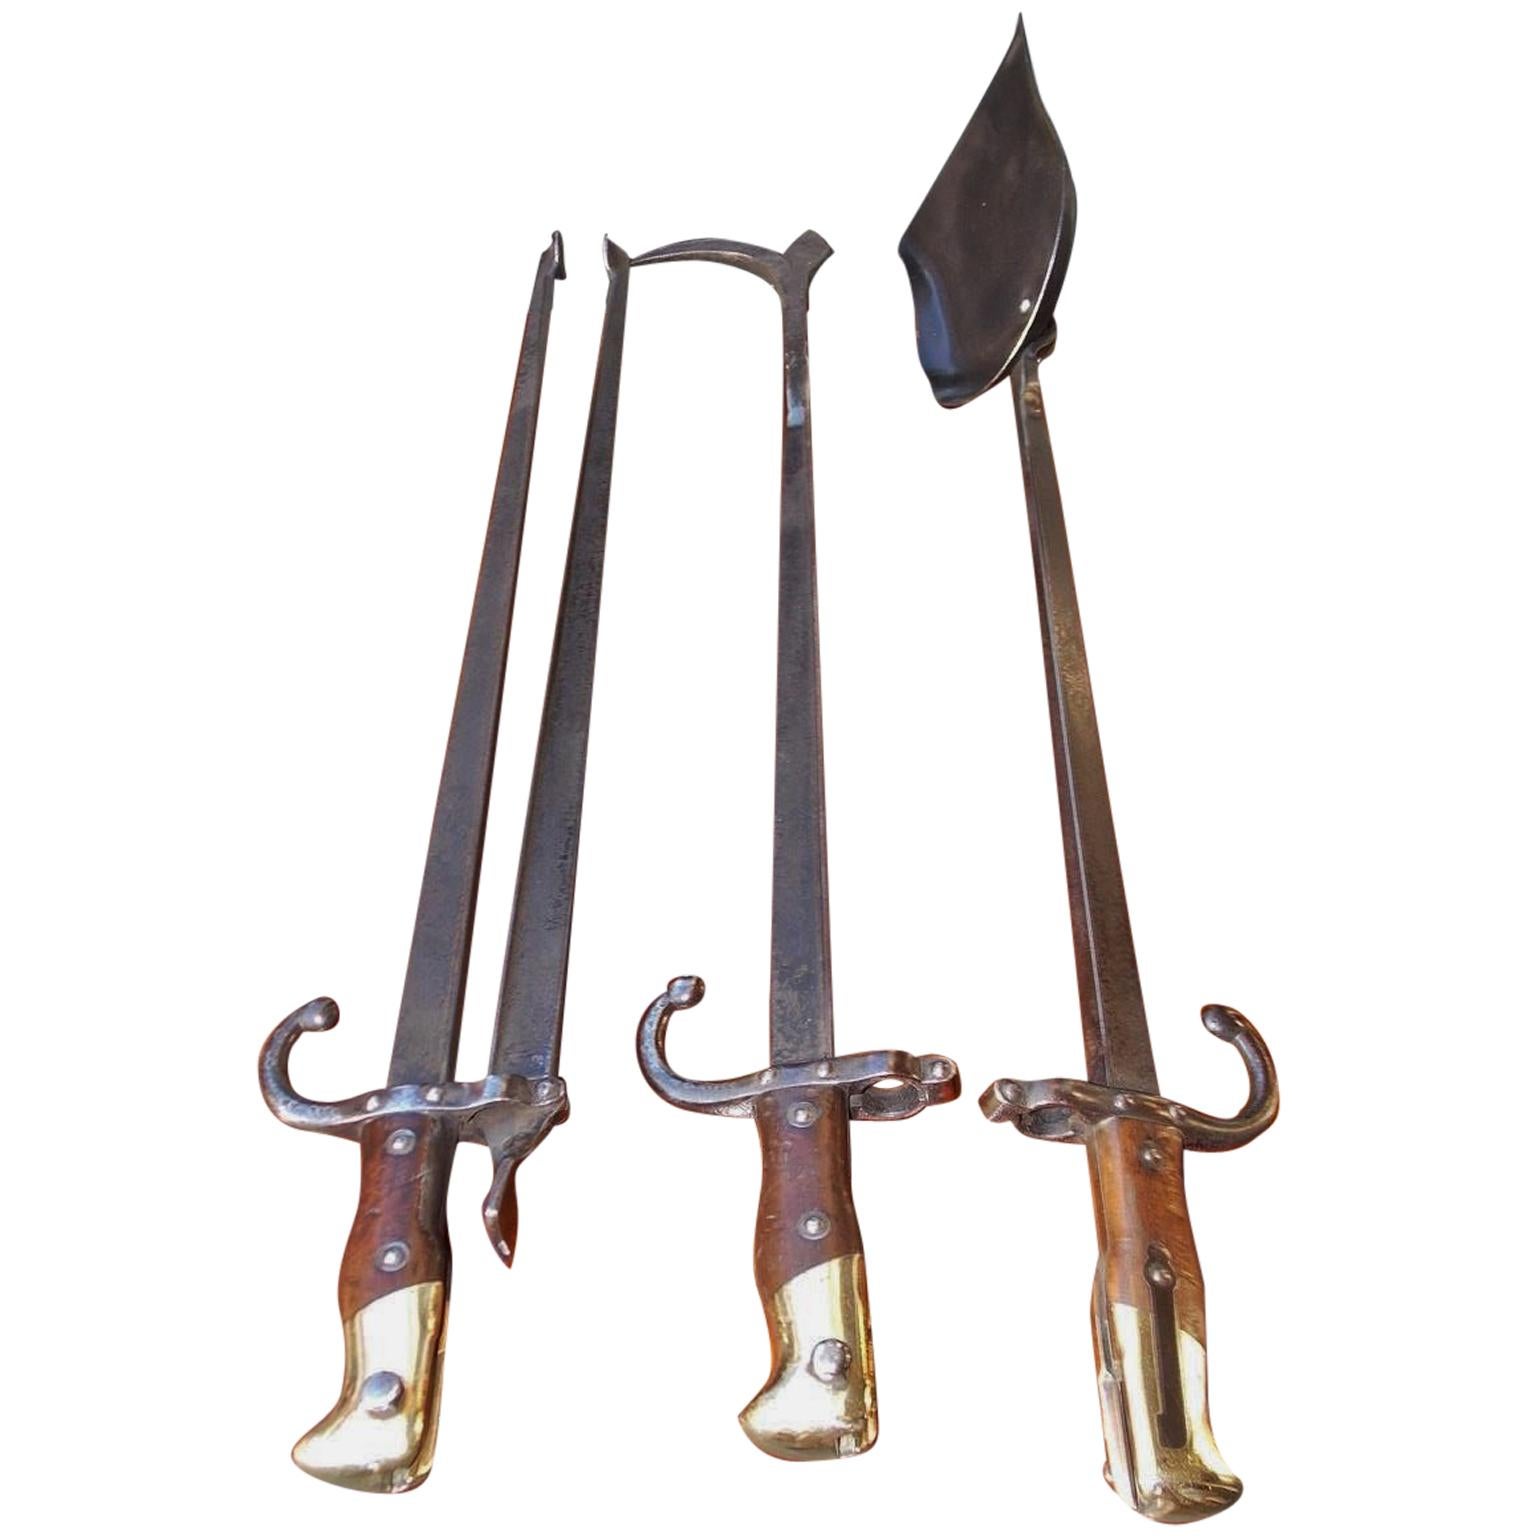 Set of Three French Walnut Forged Steel and Brass Bayonet Fire Tools, Circa 1879